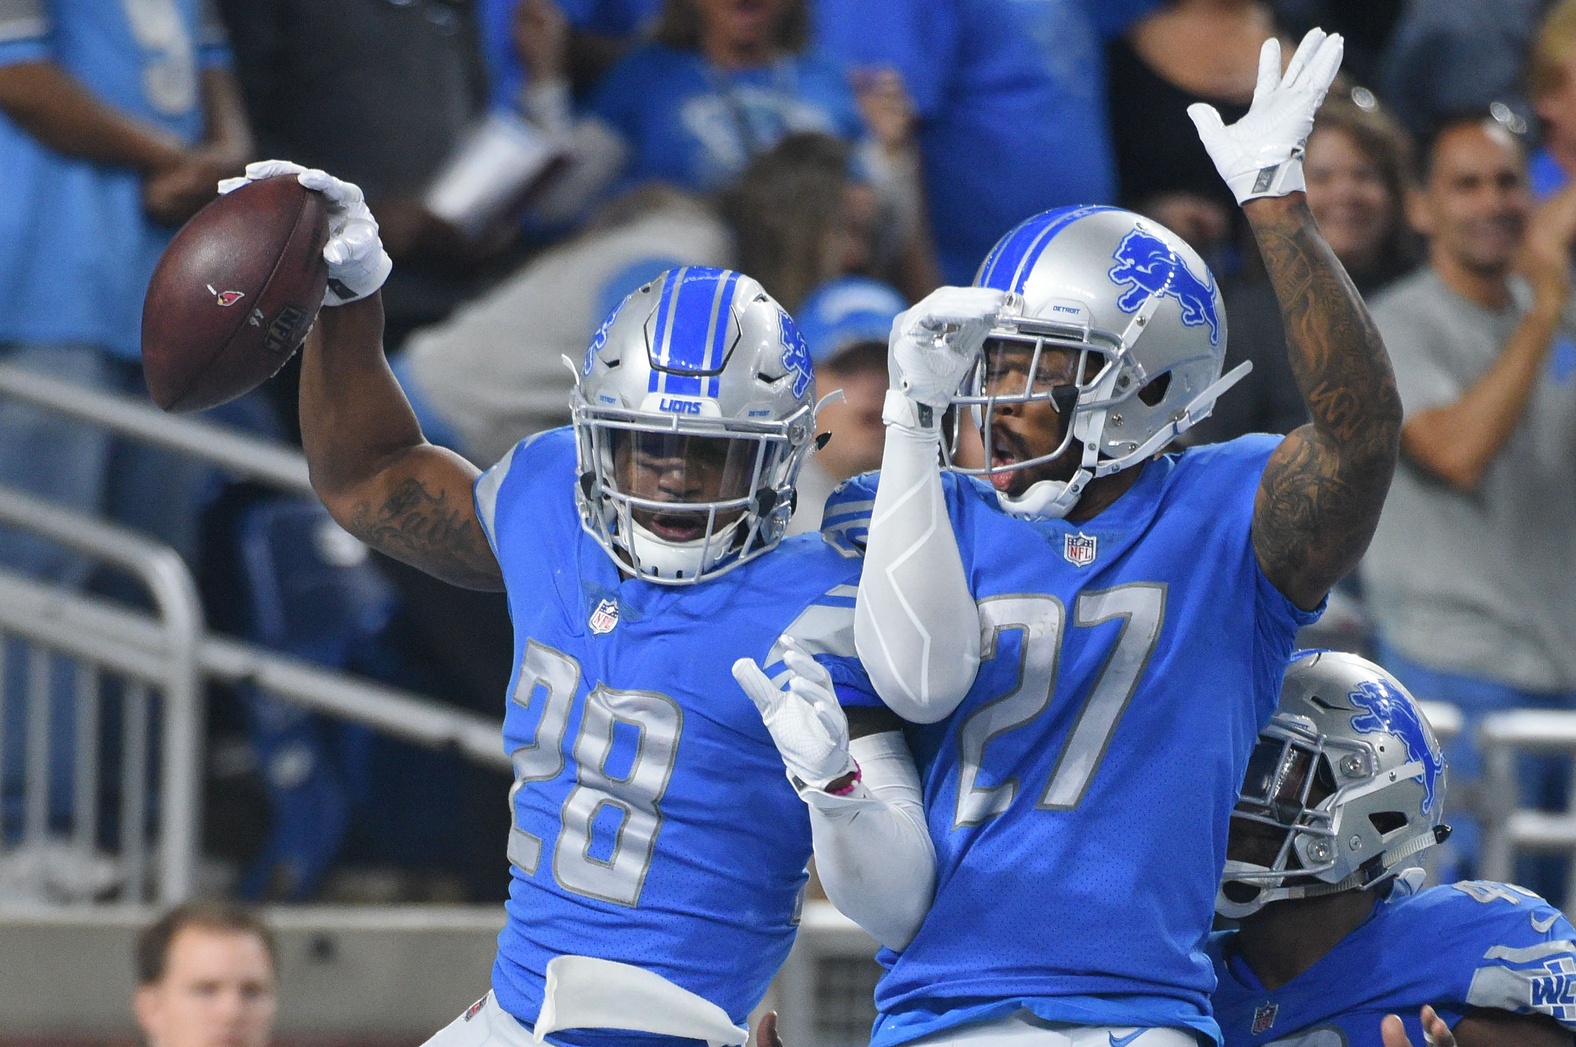 WATCH: Quandre Diggs puts Antonio Brown on his head with incredible tackle